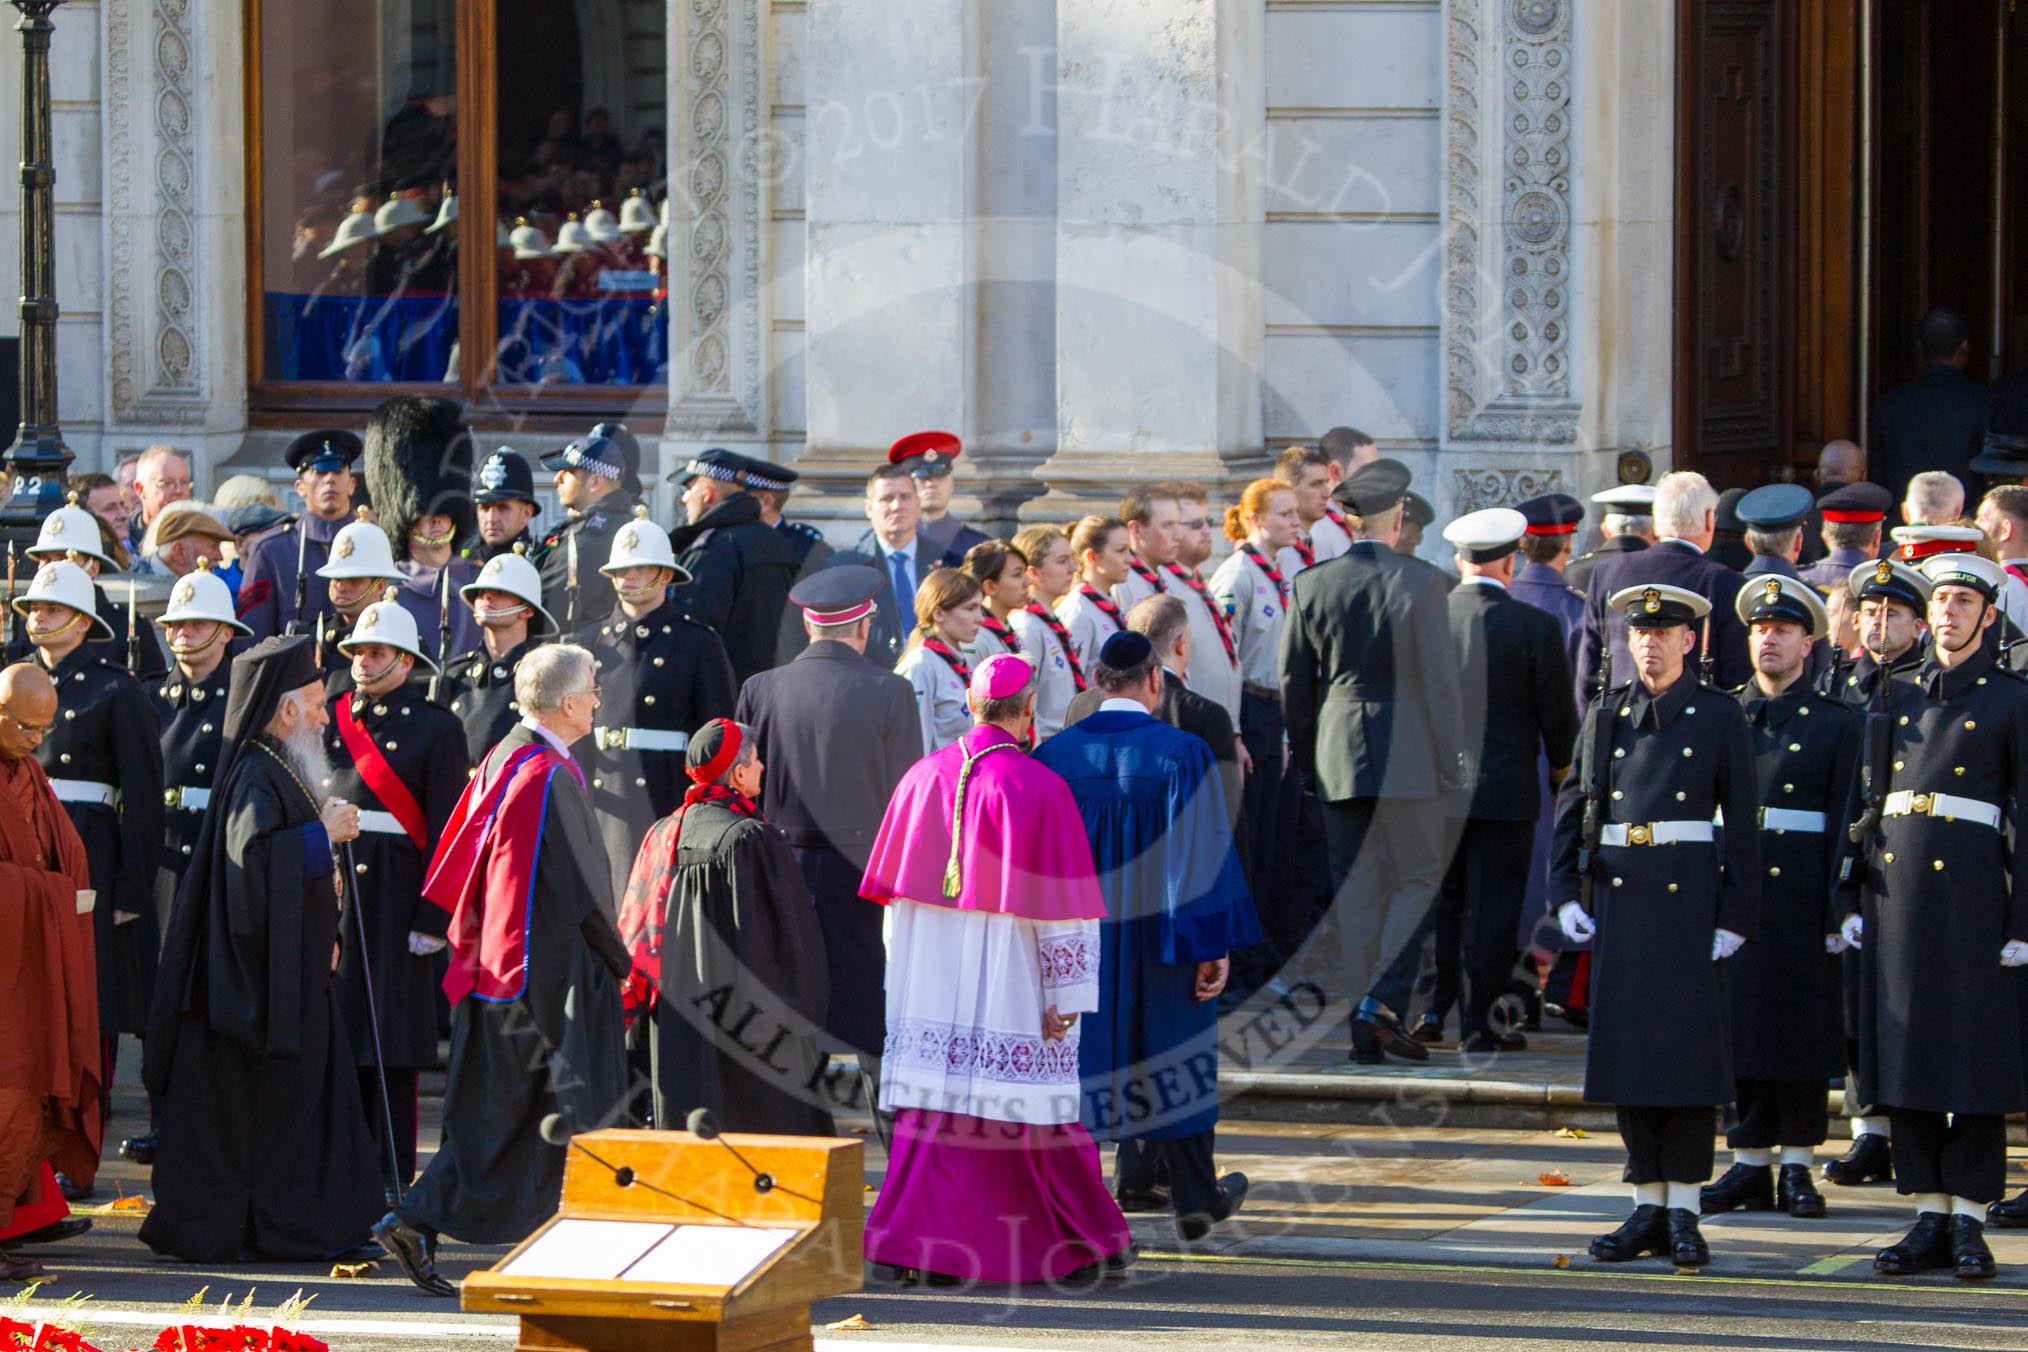 The representatives of the faith communities returning to the Foreign and Commonwealth Office during the Remembrance Sunday Cenotaph Ceremony 2018 at Horse Guards Parade, Westminster, London, 11 November 2018, 11:26.